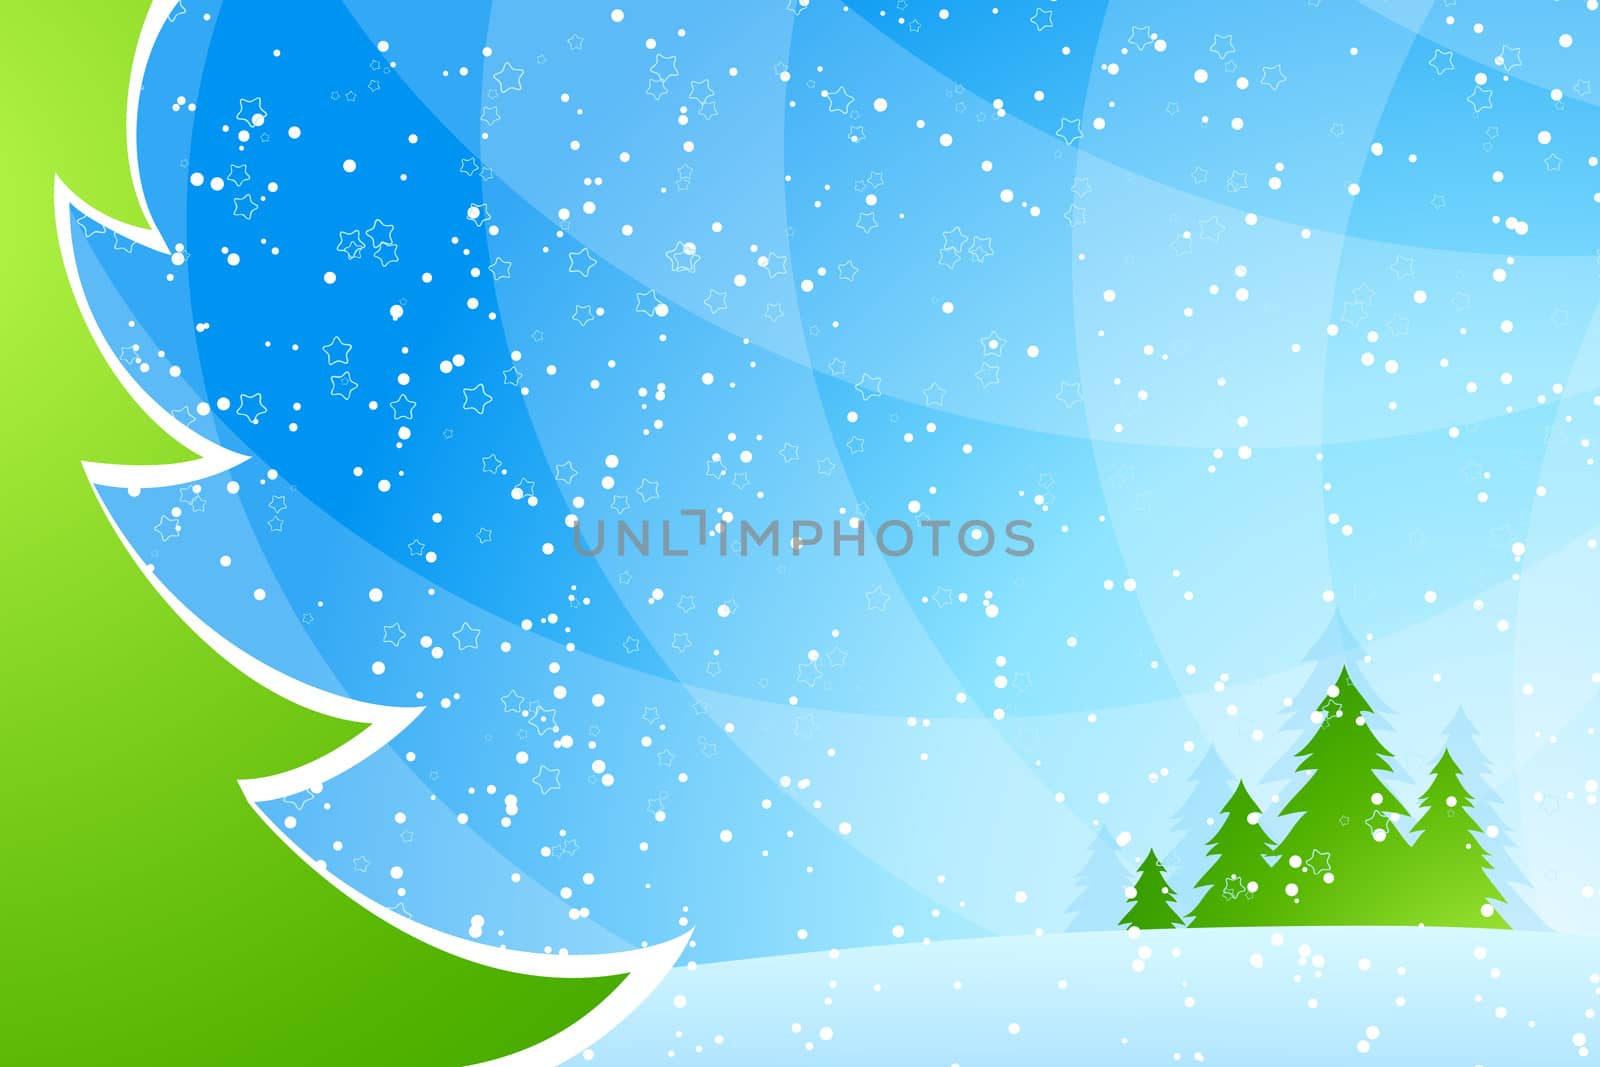 Christmas background with Christmas tree for your design